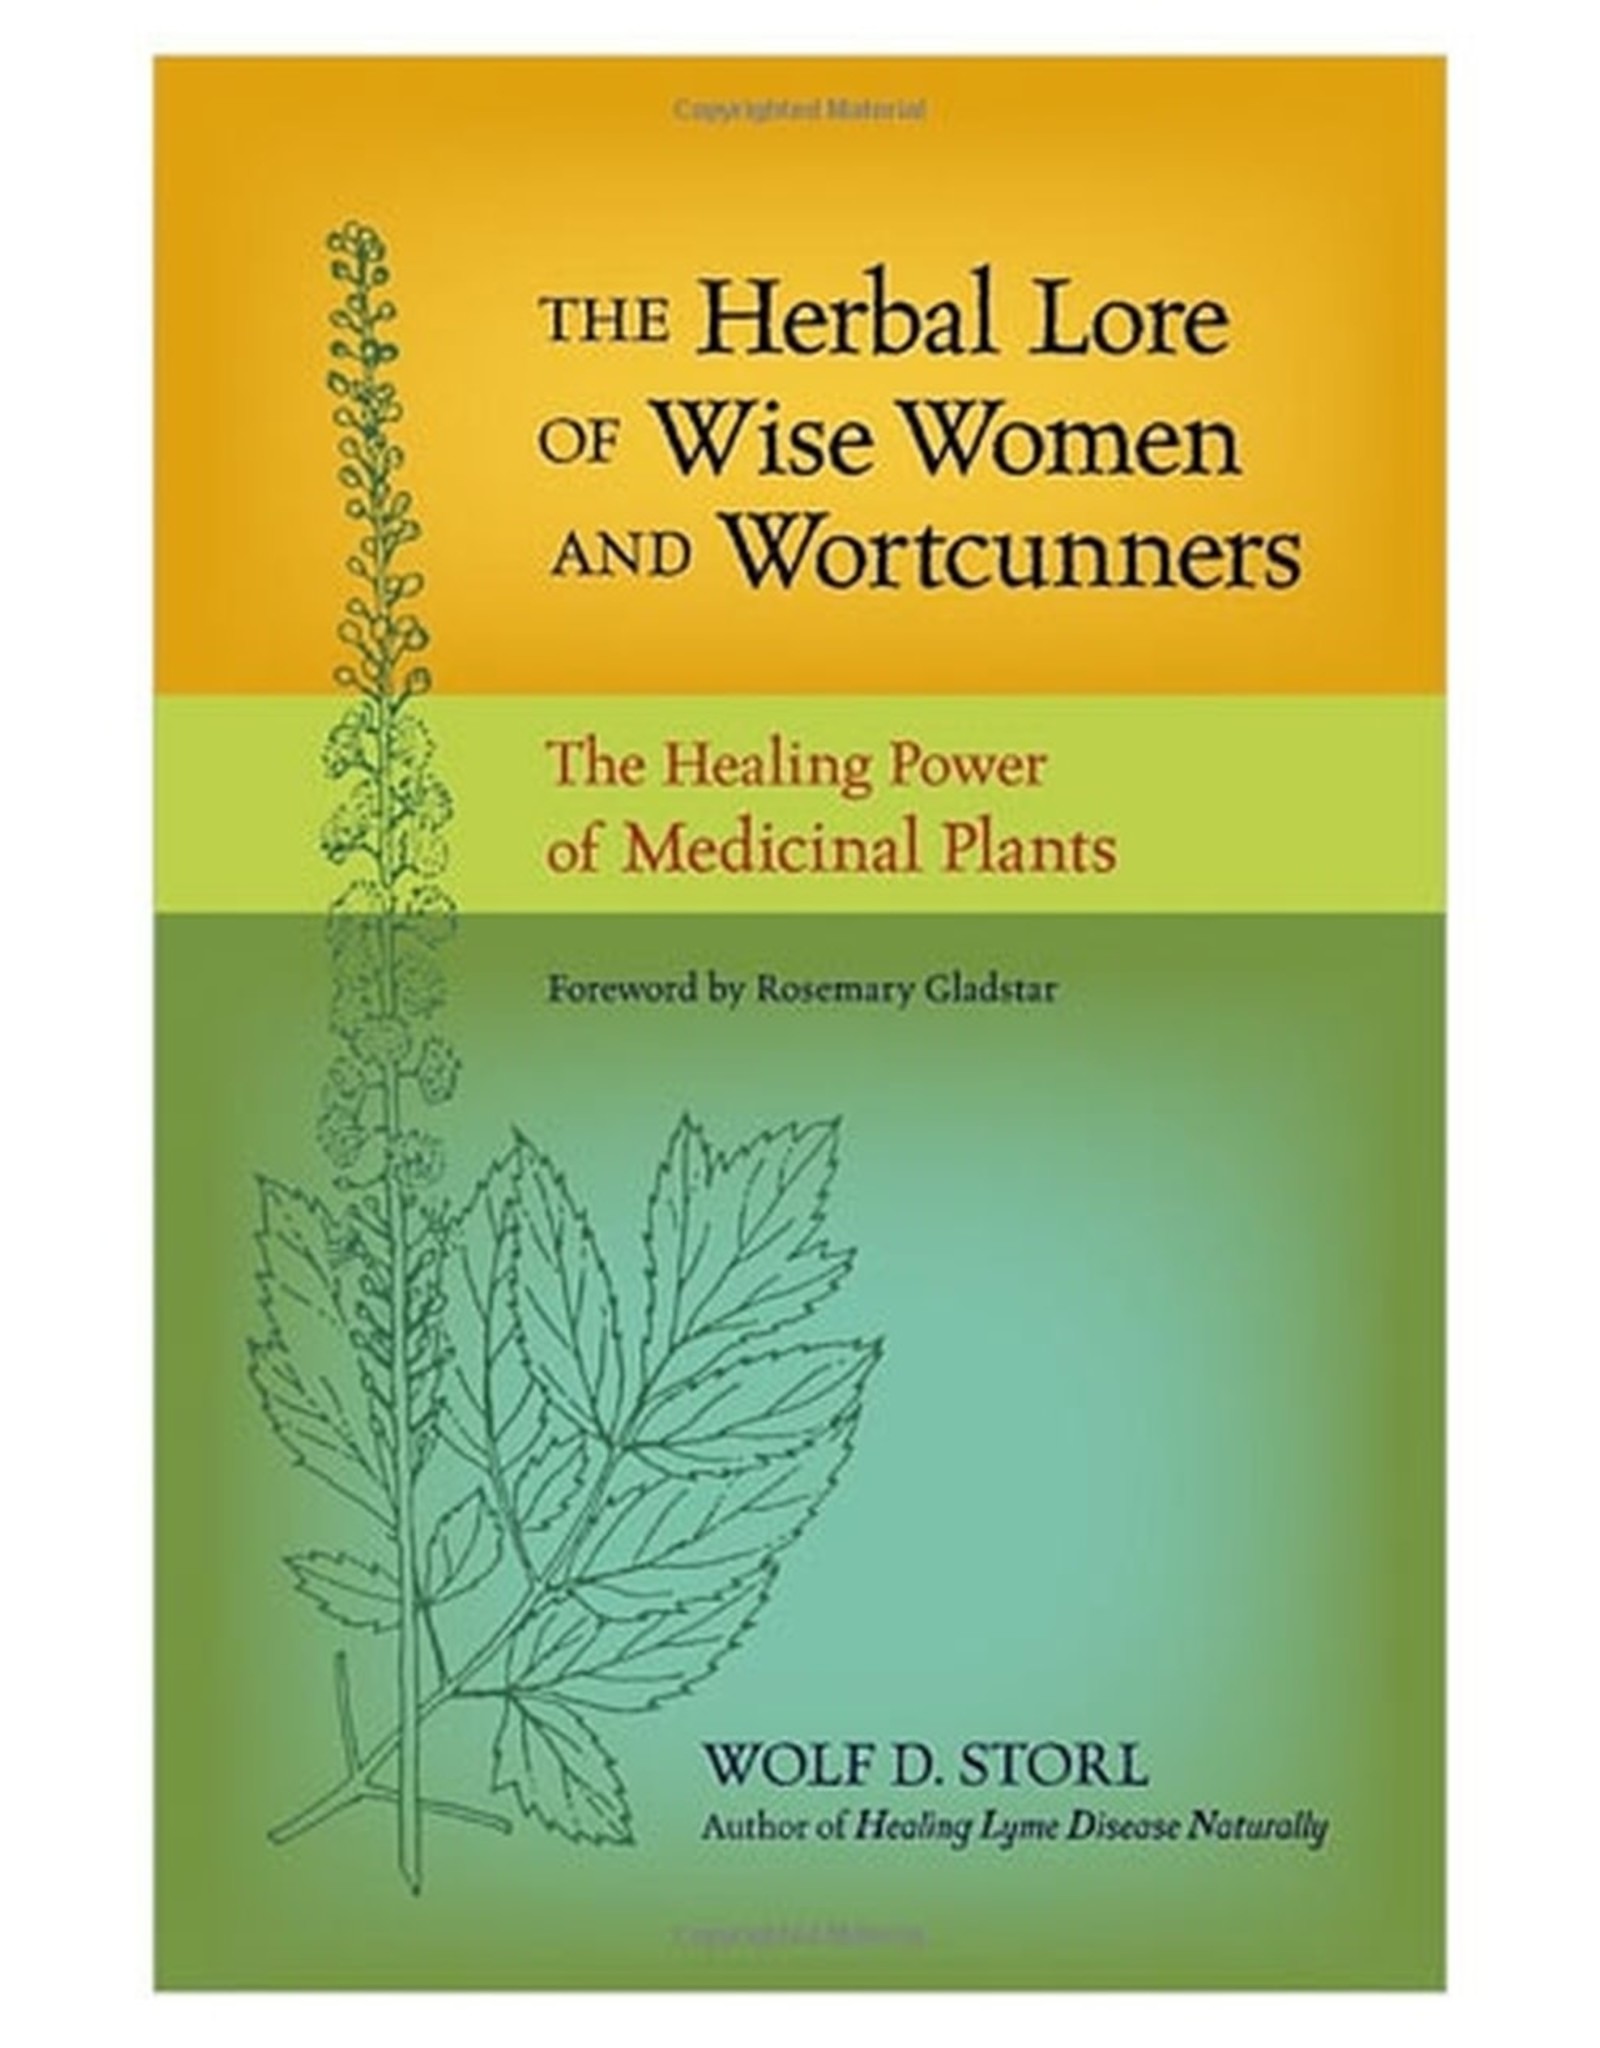 Herbal Lore of Wise Women by Wolf D. Storl